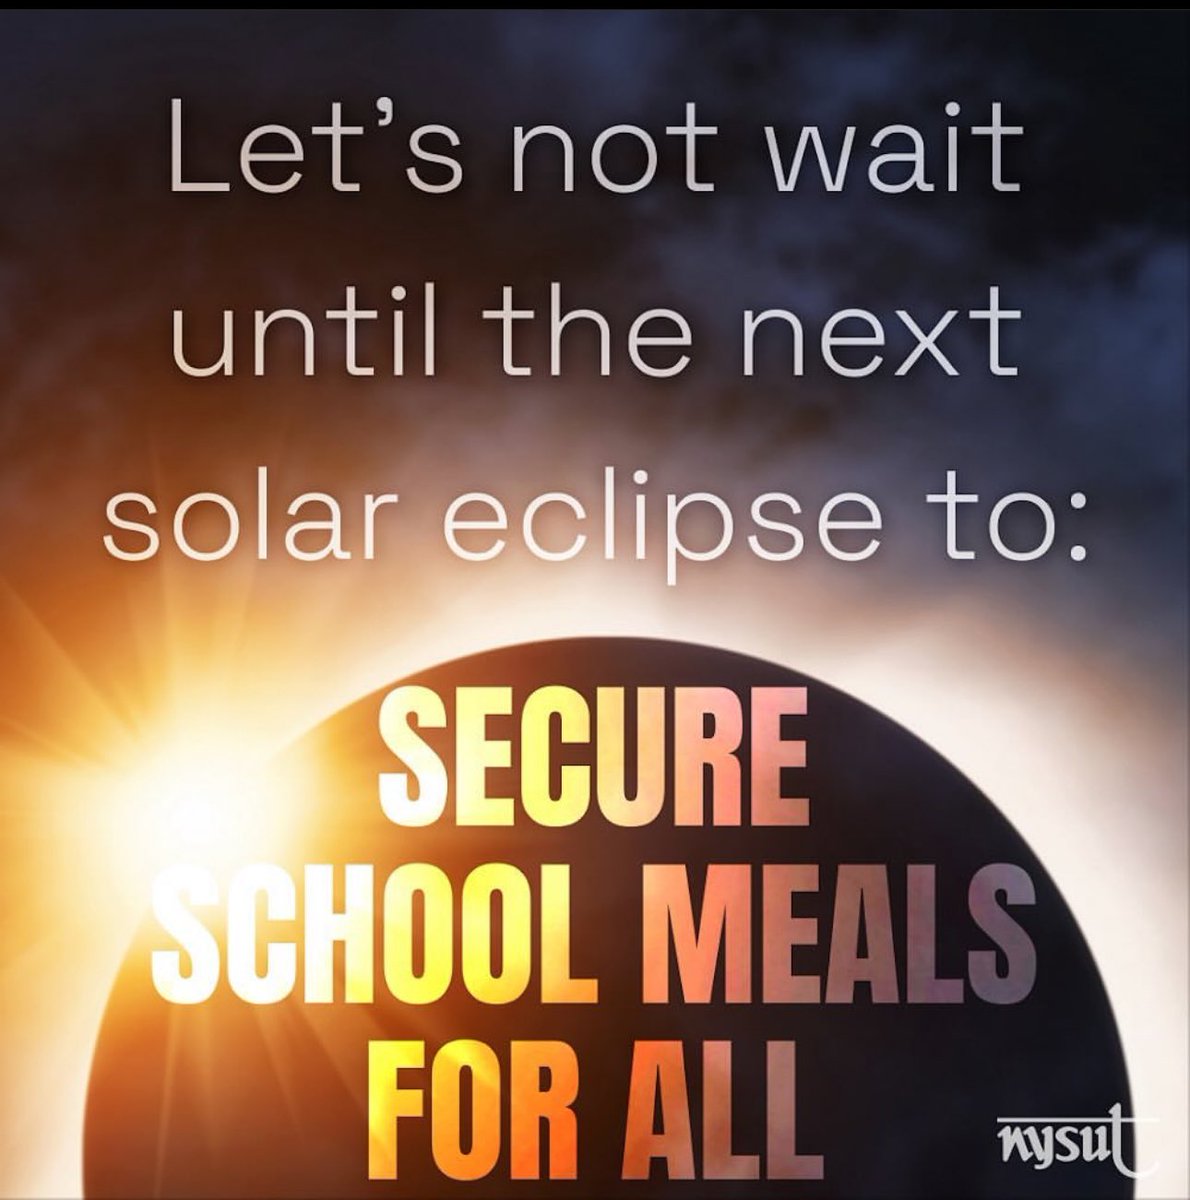 Let’s not. Let’s fund universal school meals this year for all of our students! @nysut #Meals4AllNY #Eclipse2024